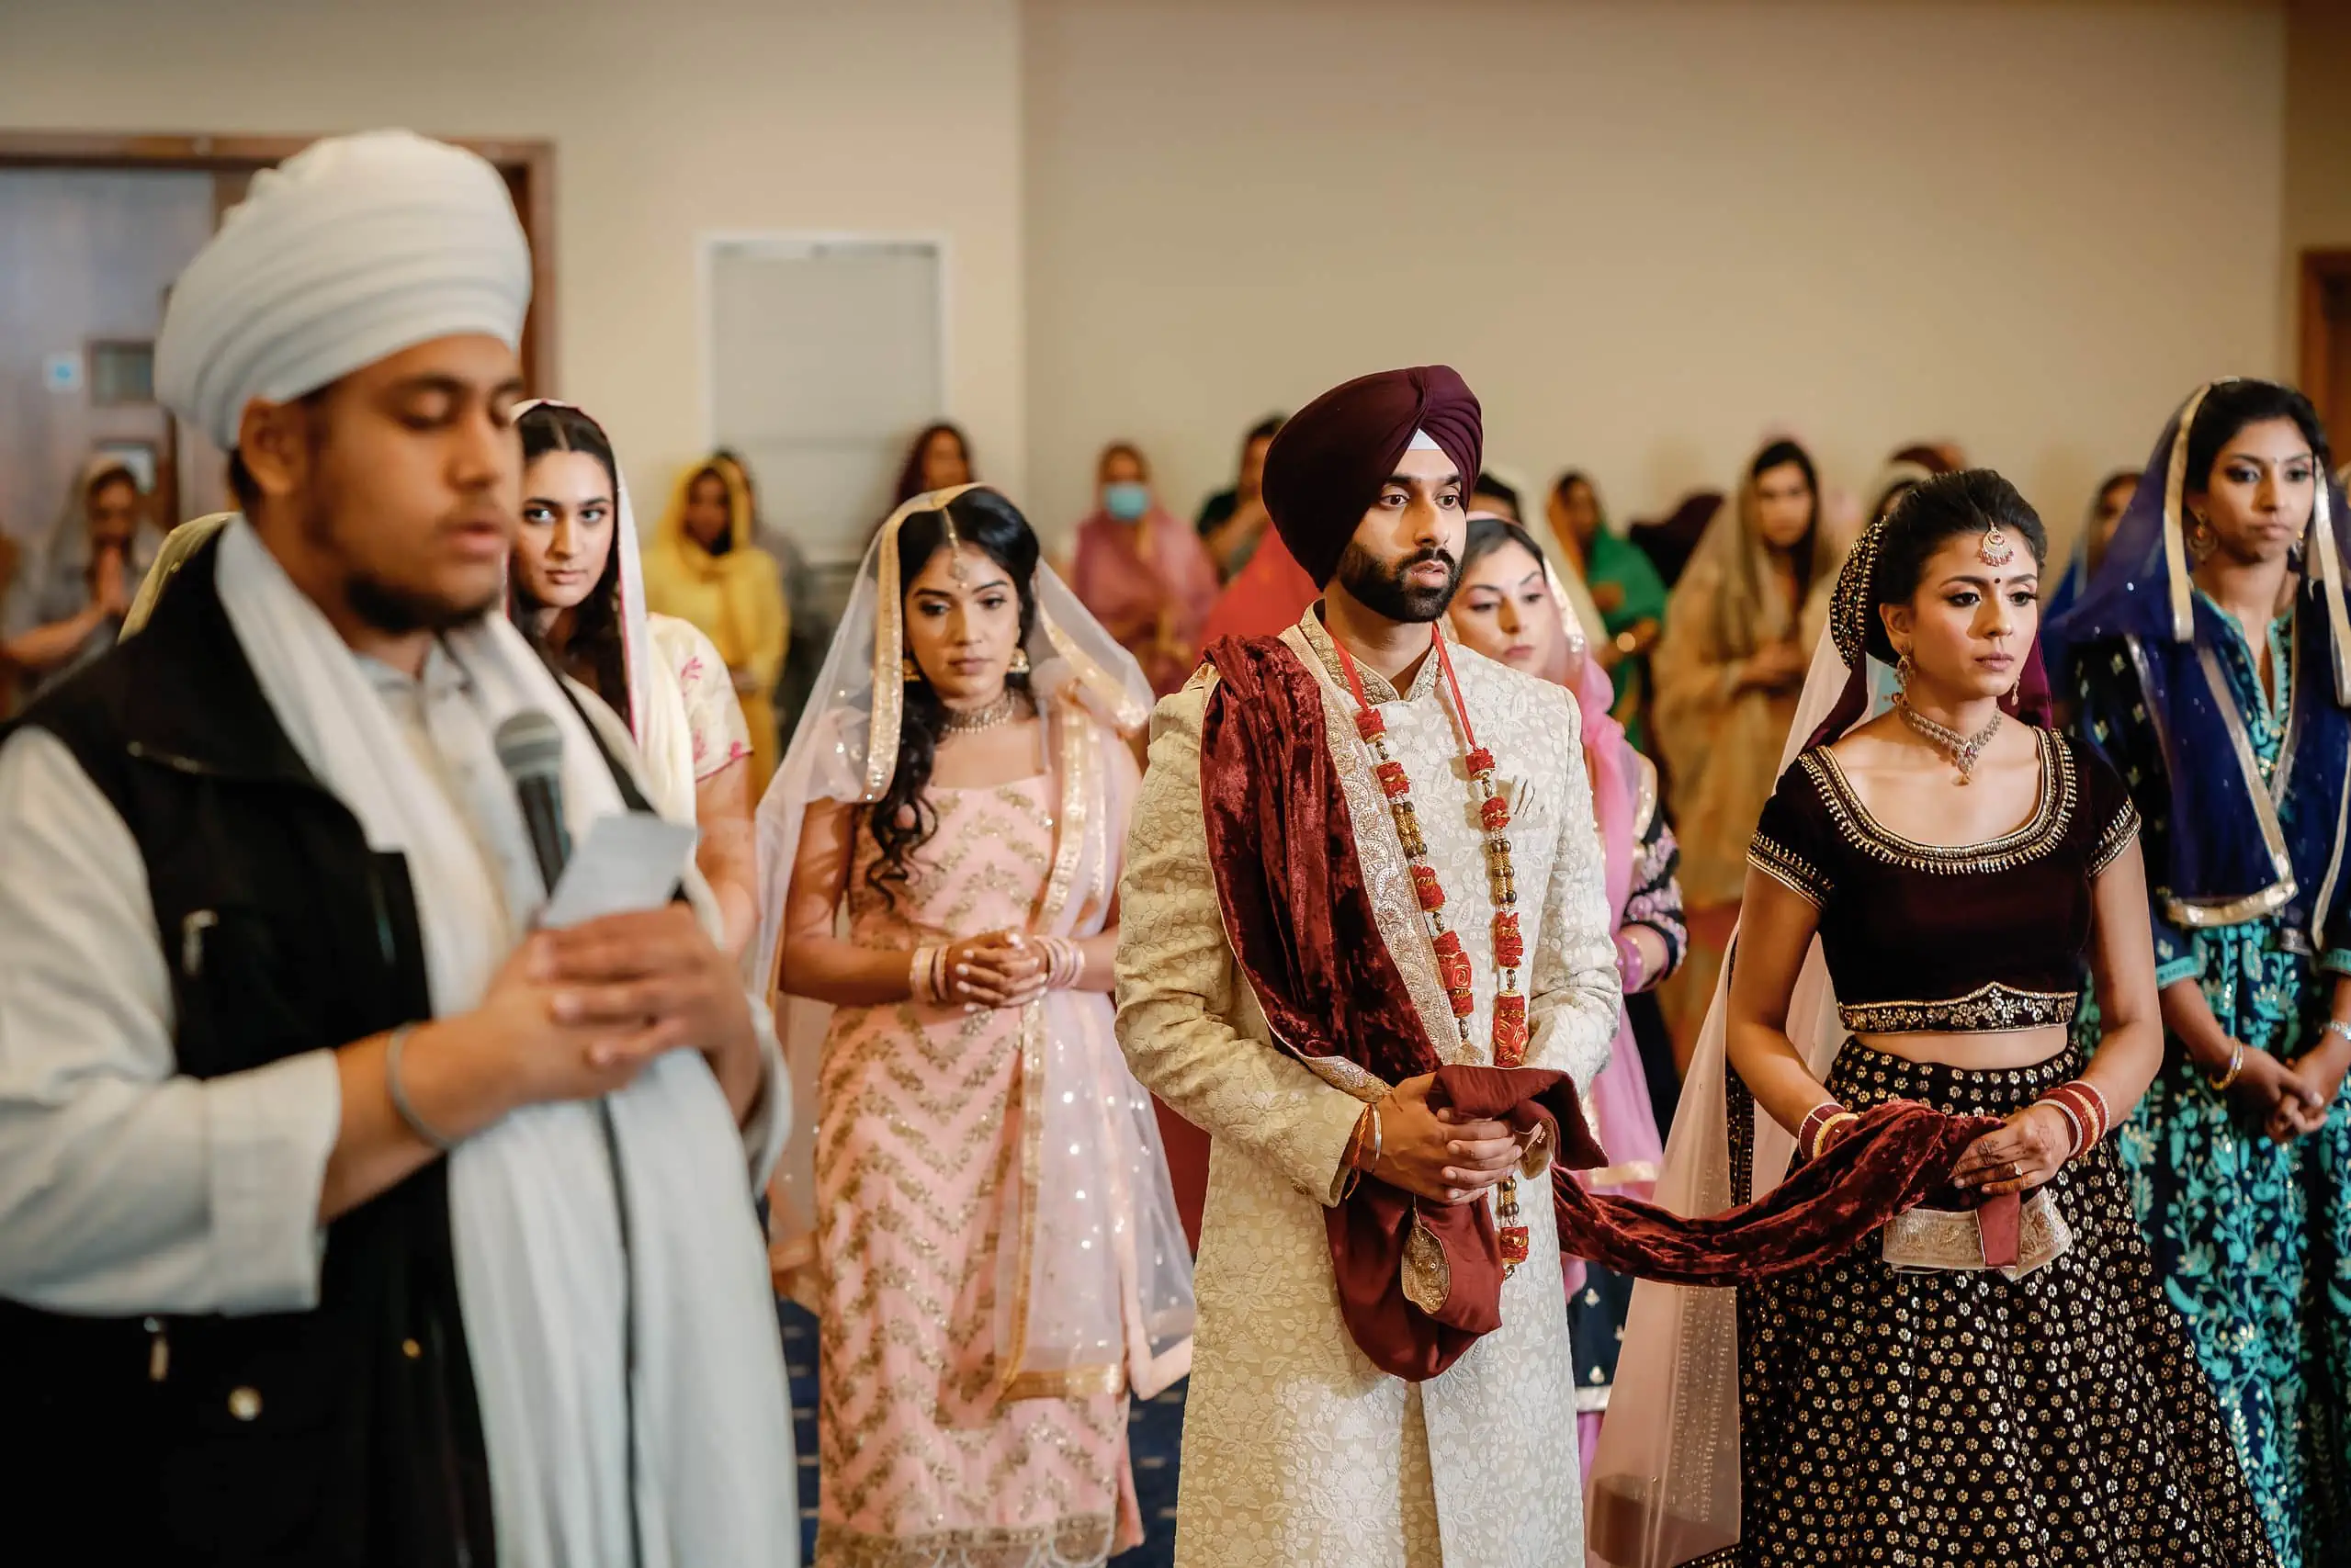 Ardaas to mark the end of the wedding ceremony